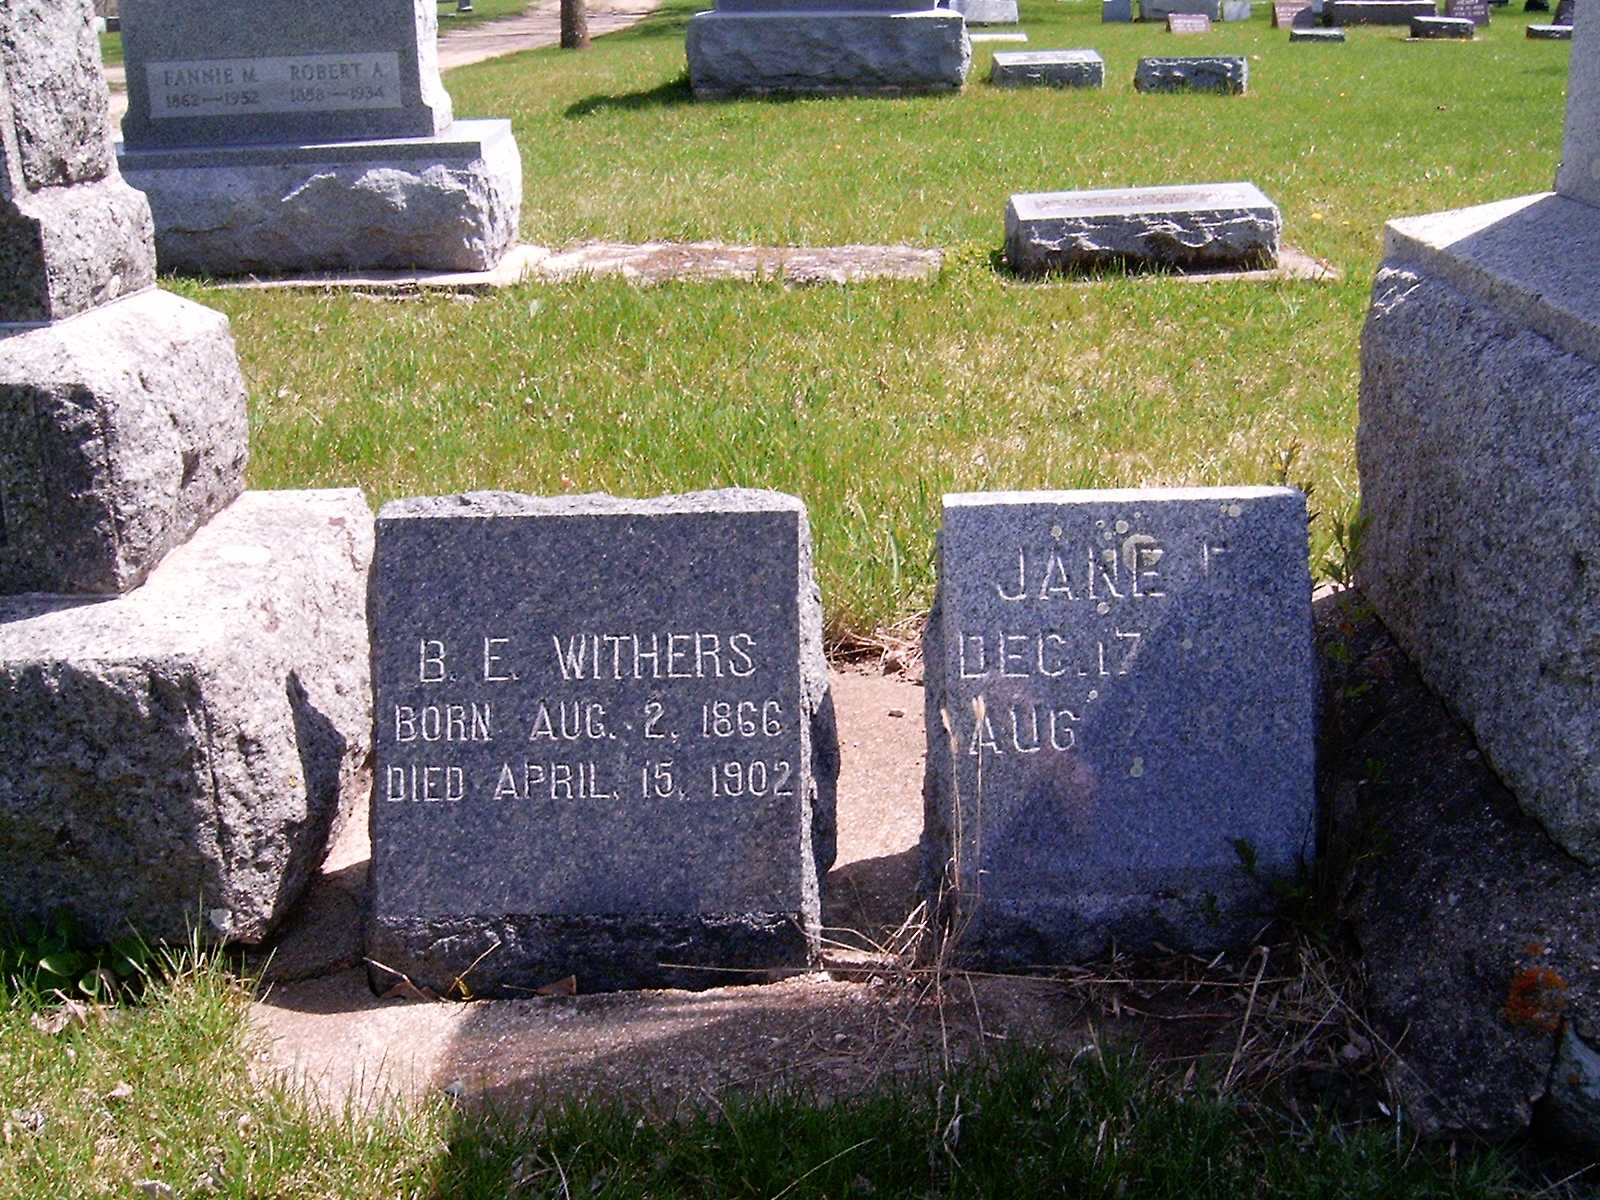 b.e.withers